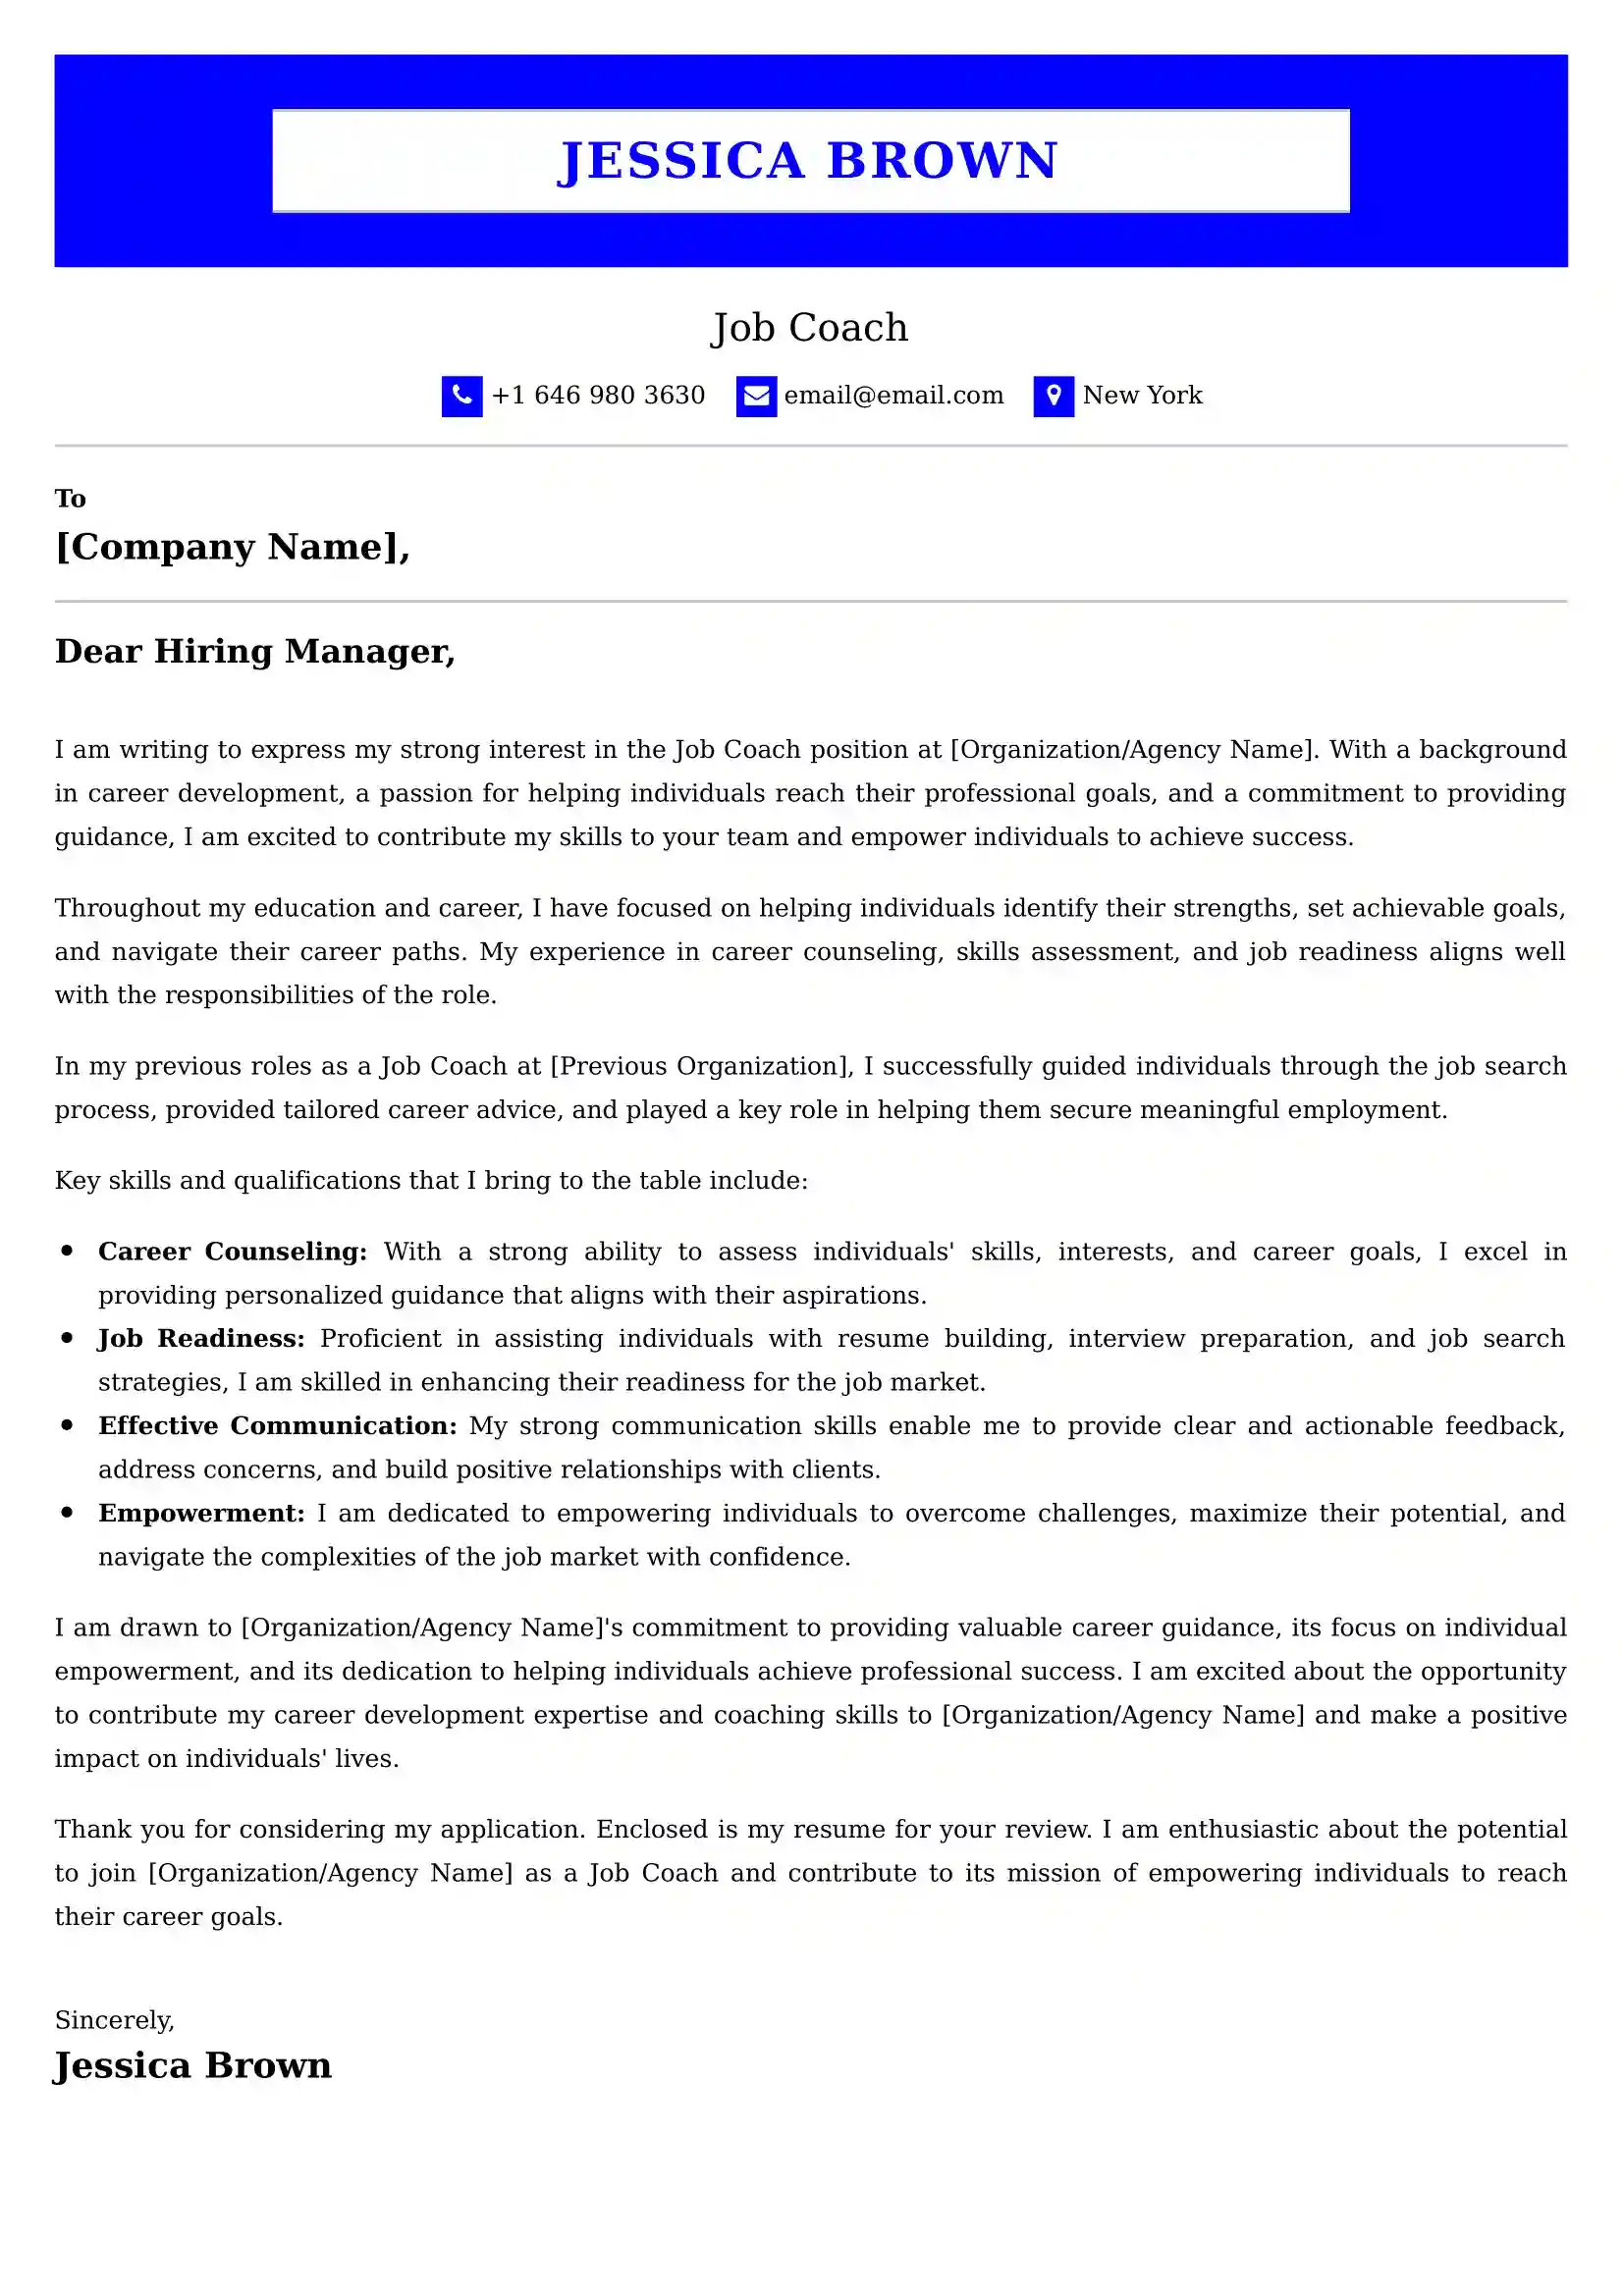 Job Coach Cover Letter Examples UK - Tips and Guide